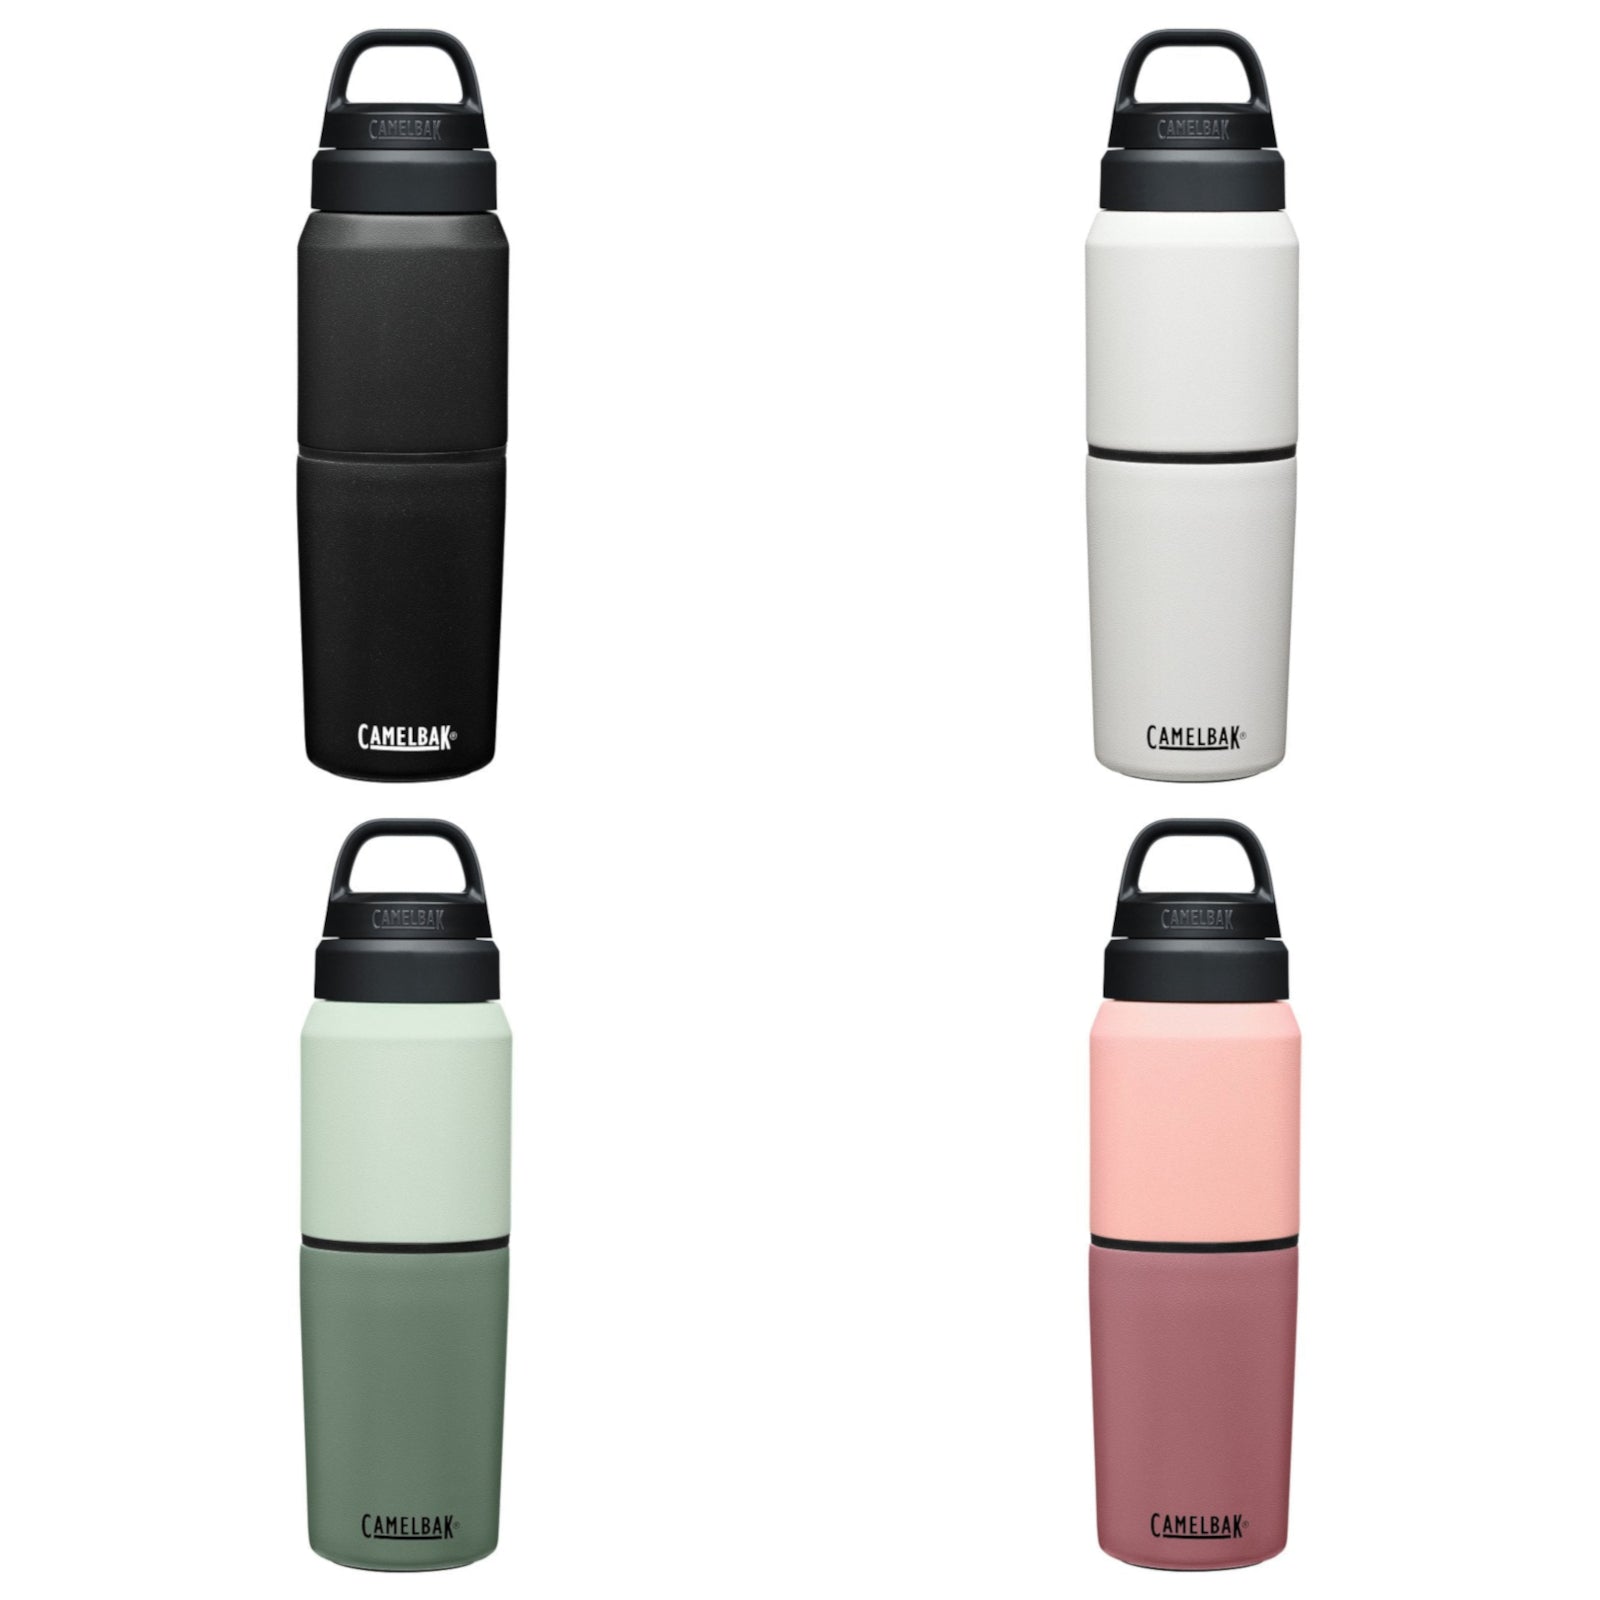 Camelbak MultiBev SST All in One Vacuum Insulated Stainless Steel 500ml 2021 Camping Flask Collection